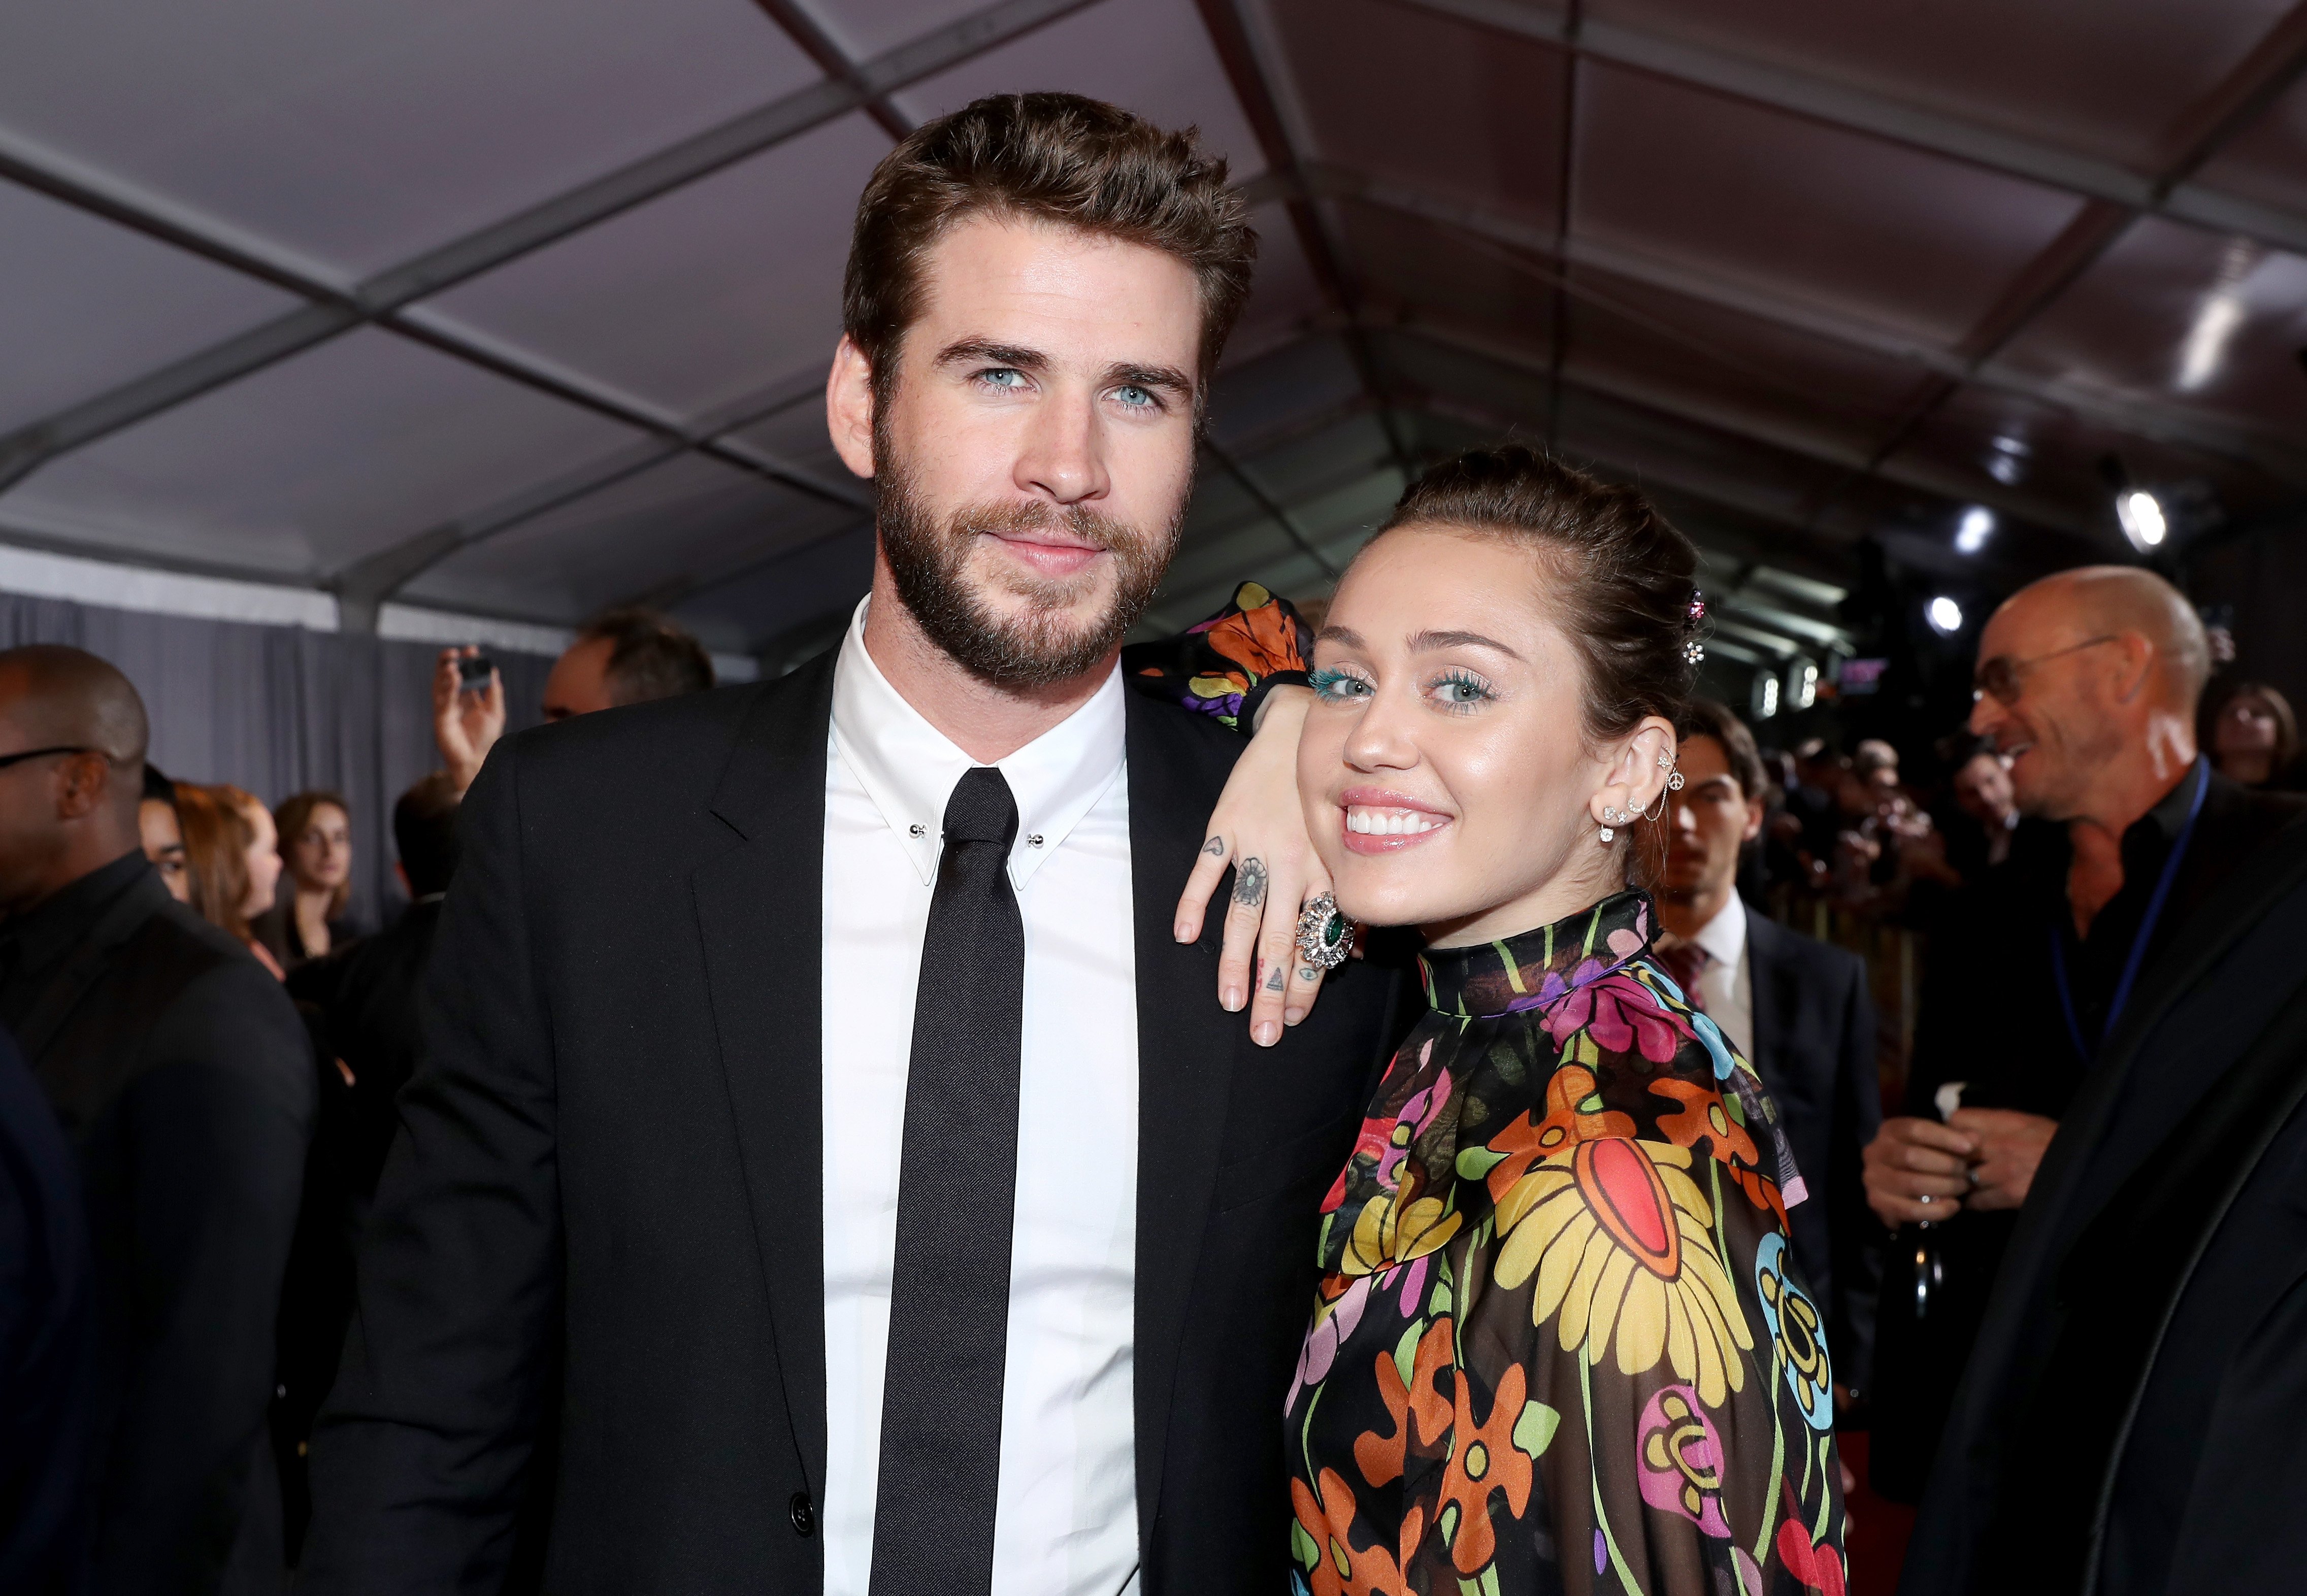 Liam Hemsworth and Miley Cyrus at The World Premiere of Marvel Studios' "Thor: Ragnarok" at the El Capitan Theatre on October 10, 201. | Photo: GettyImages 